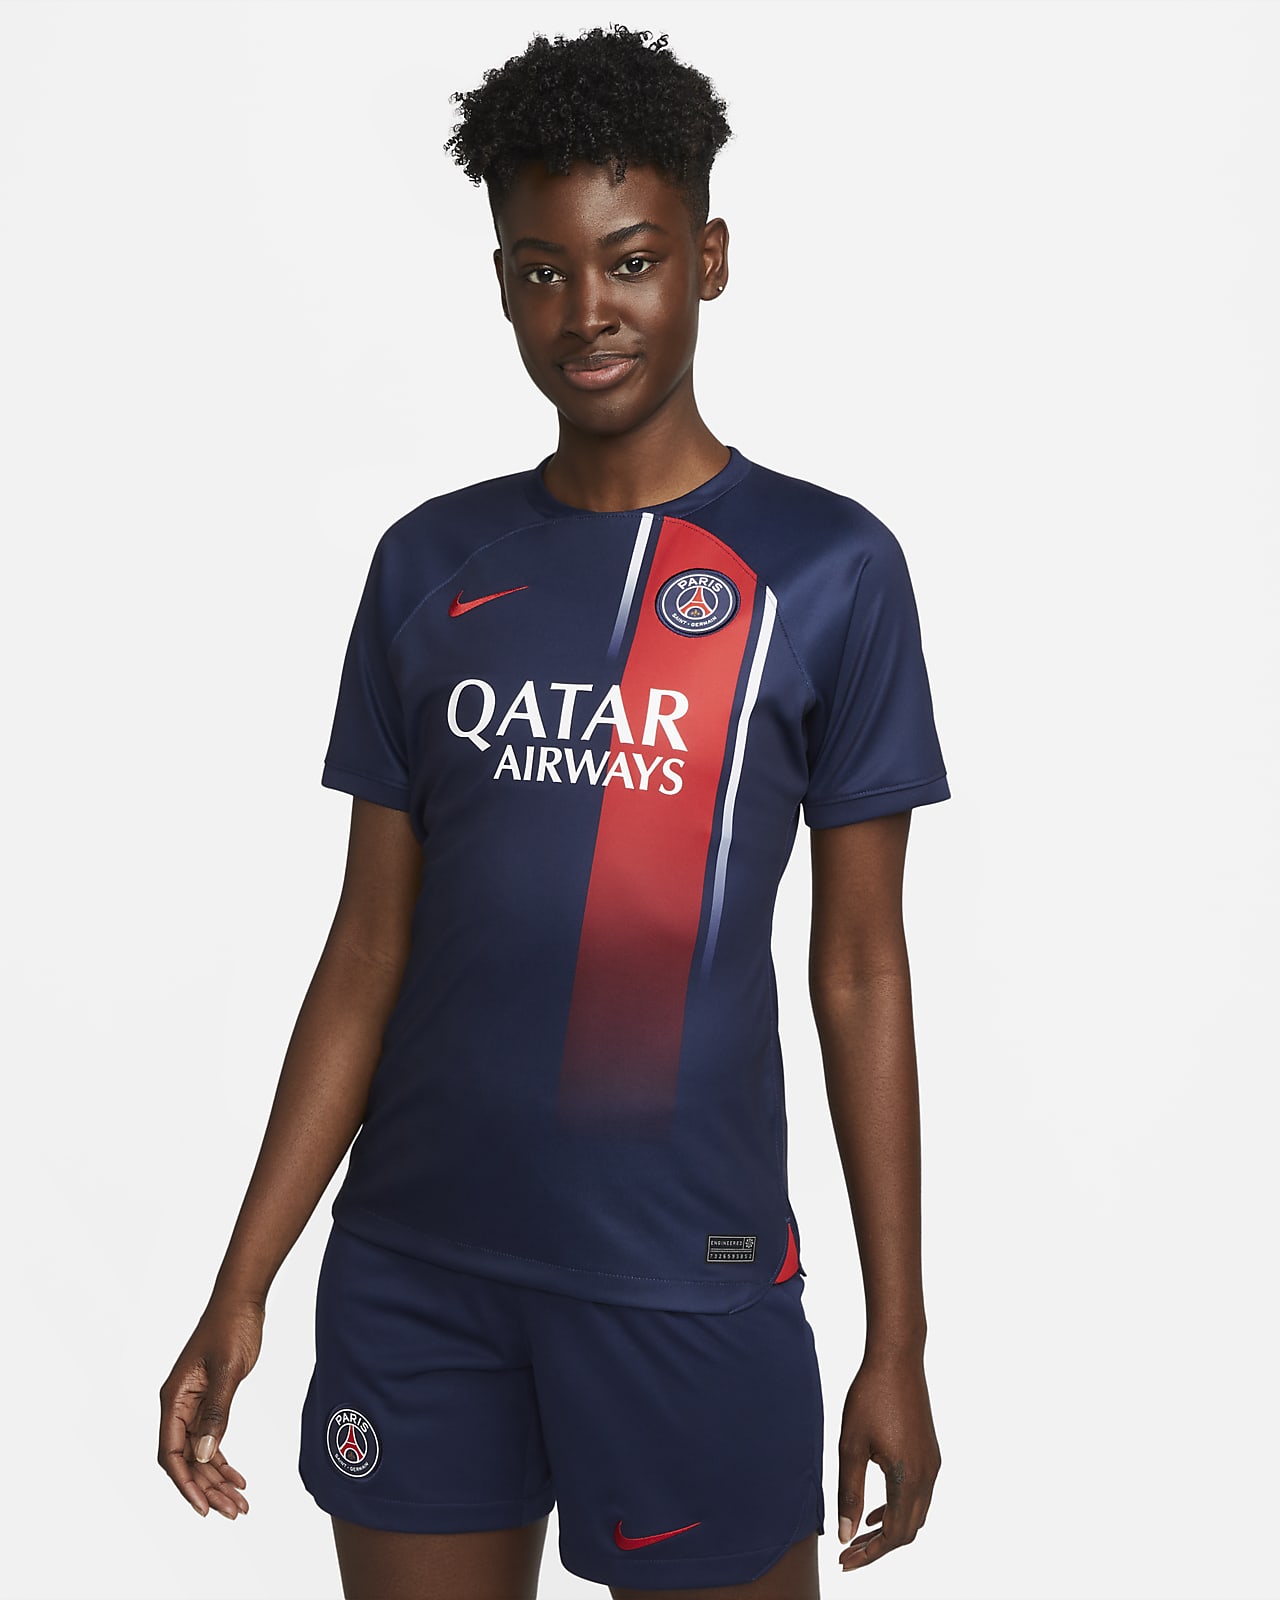 2023/2024 Nike PSG Home Match Jersey, 51% OFF